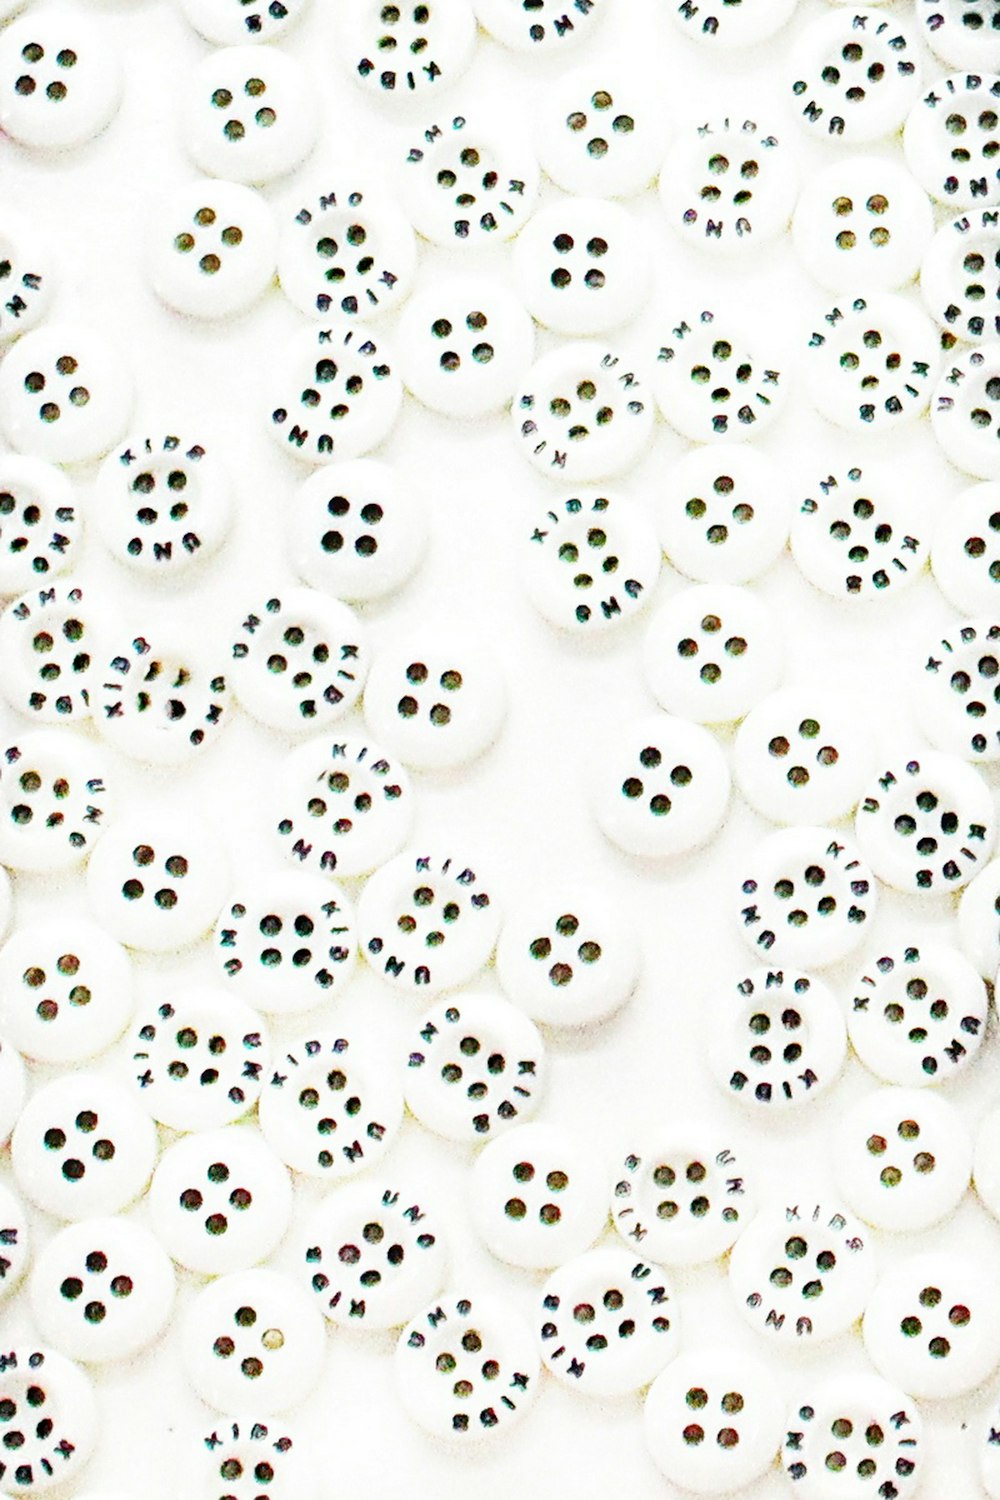 a group of buttons sitting on top of a white surface